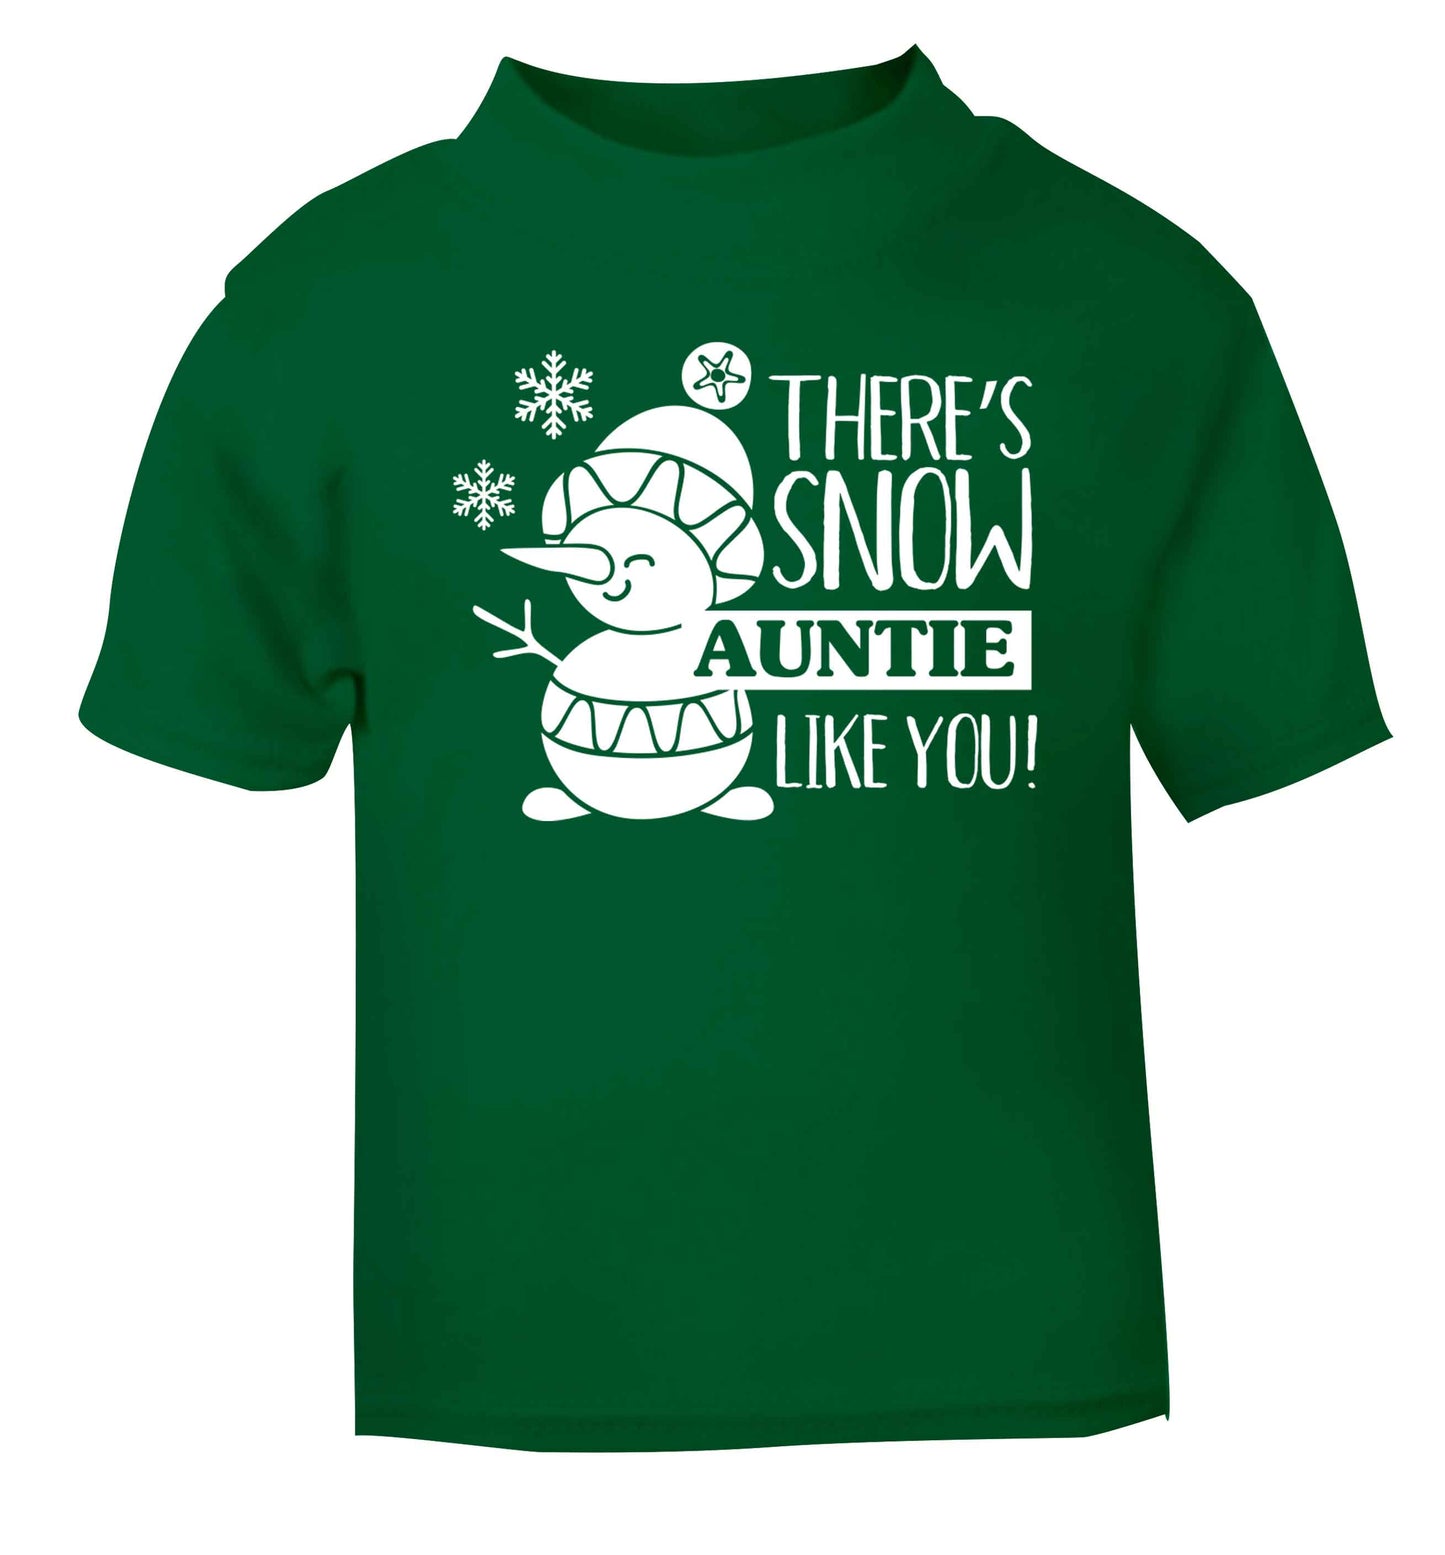 There's snow auntie like you green baby toddler Tshirt 2 Years